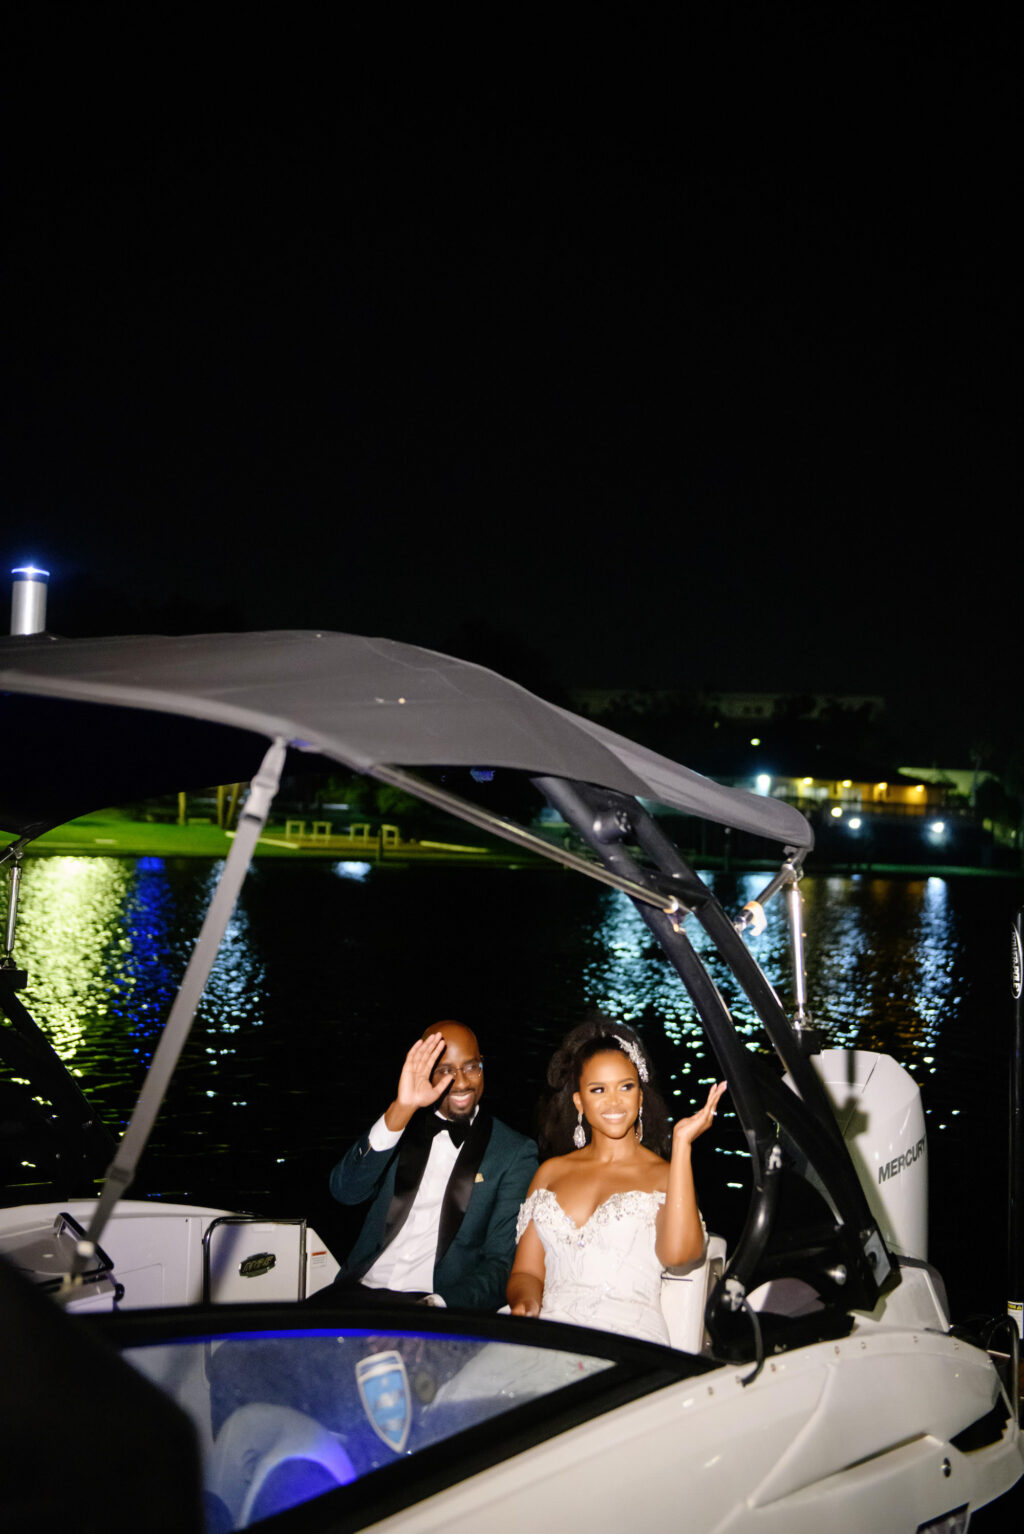 Bride and Groom Wedding Reception Boat Grand Exit Inspiration